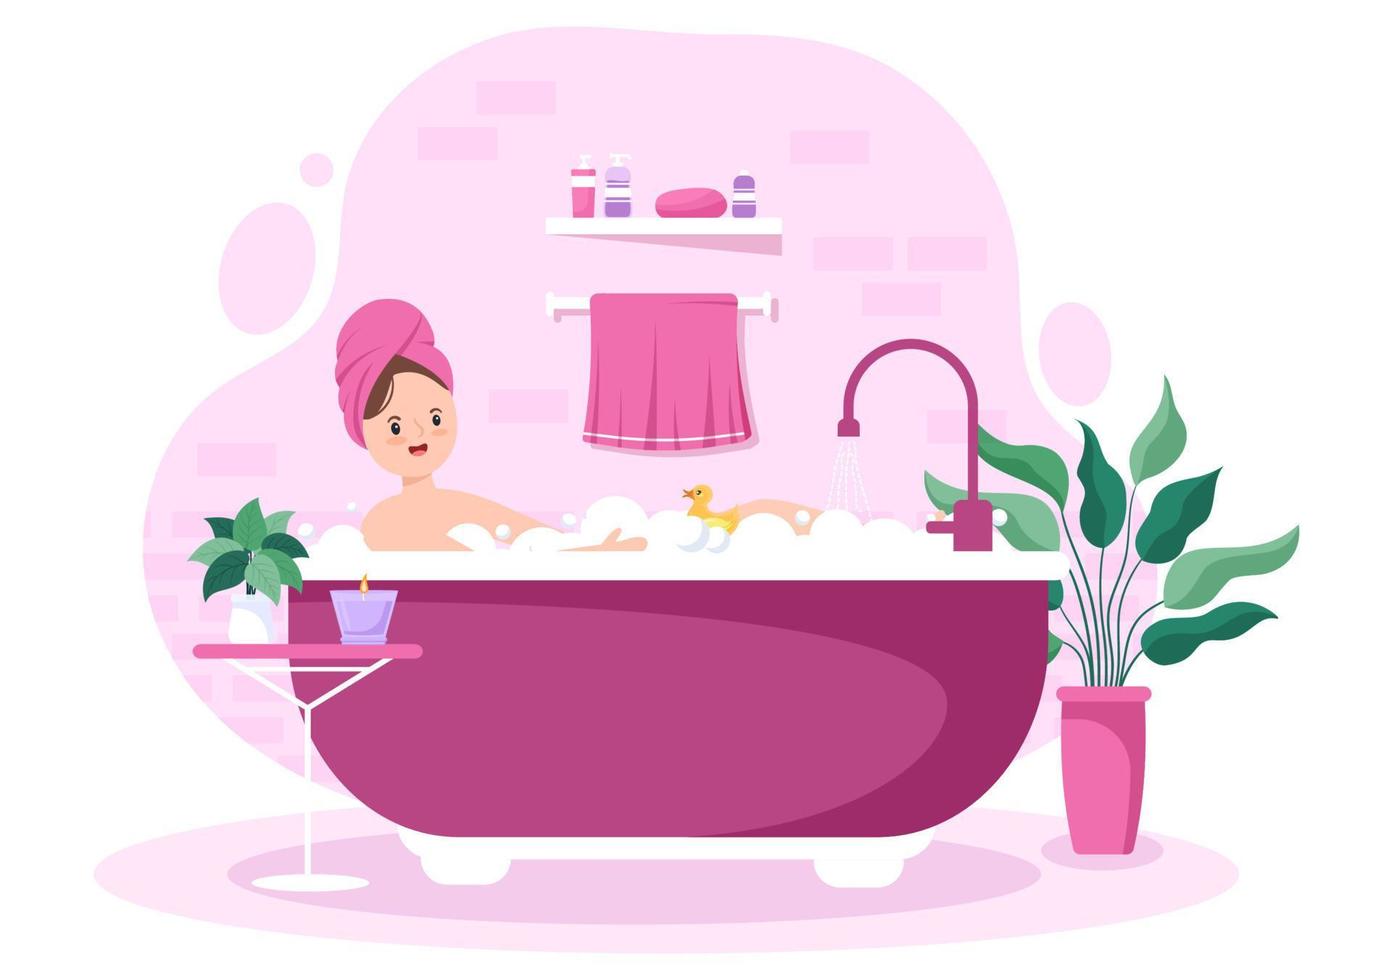 Modern Bathroom Furniture Interior Background Illustration with girl taking a bath in the bathtub in Flat Color Style vector